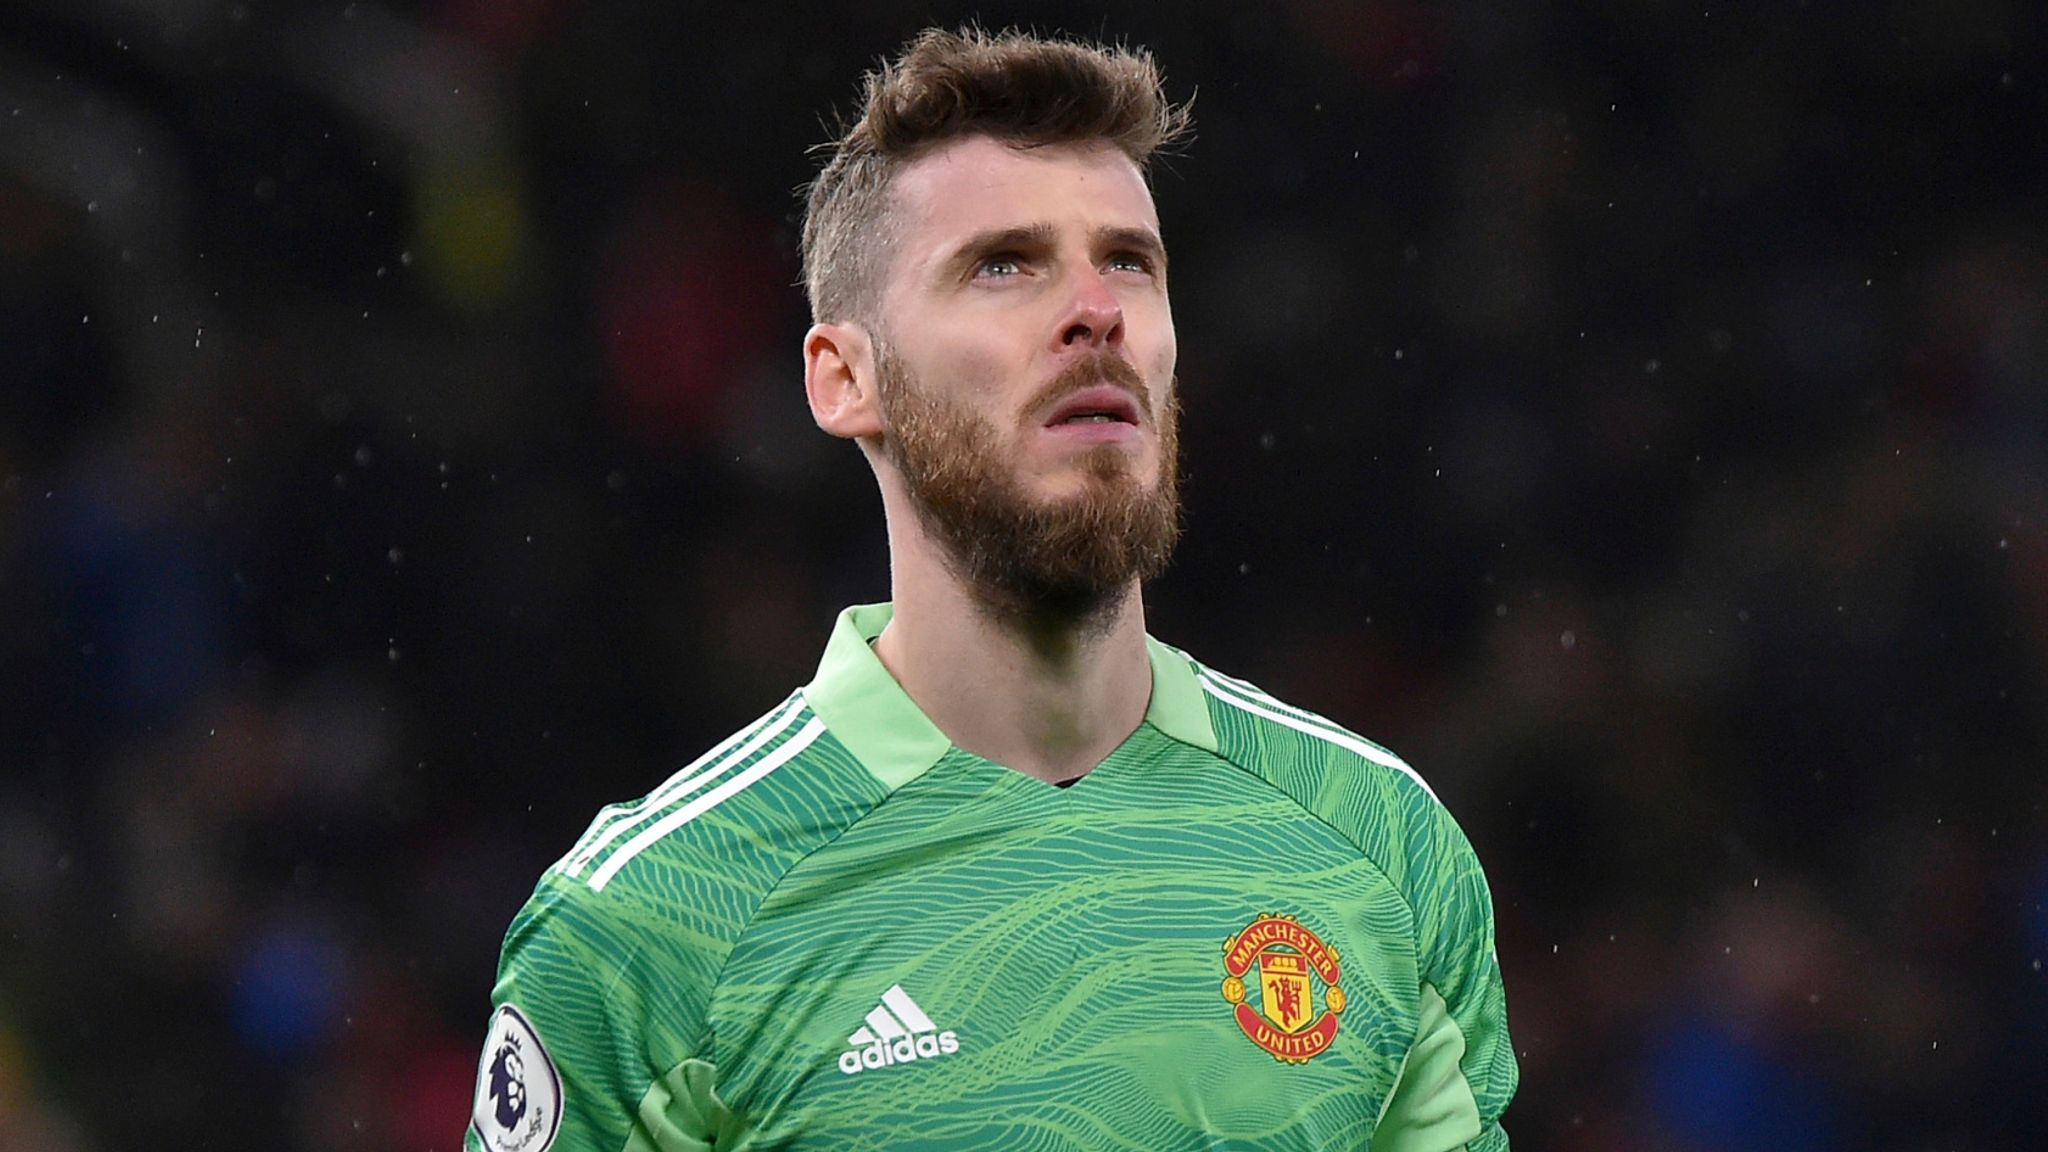 David de Gea on his future 'I don't see myself away from Manchester